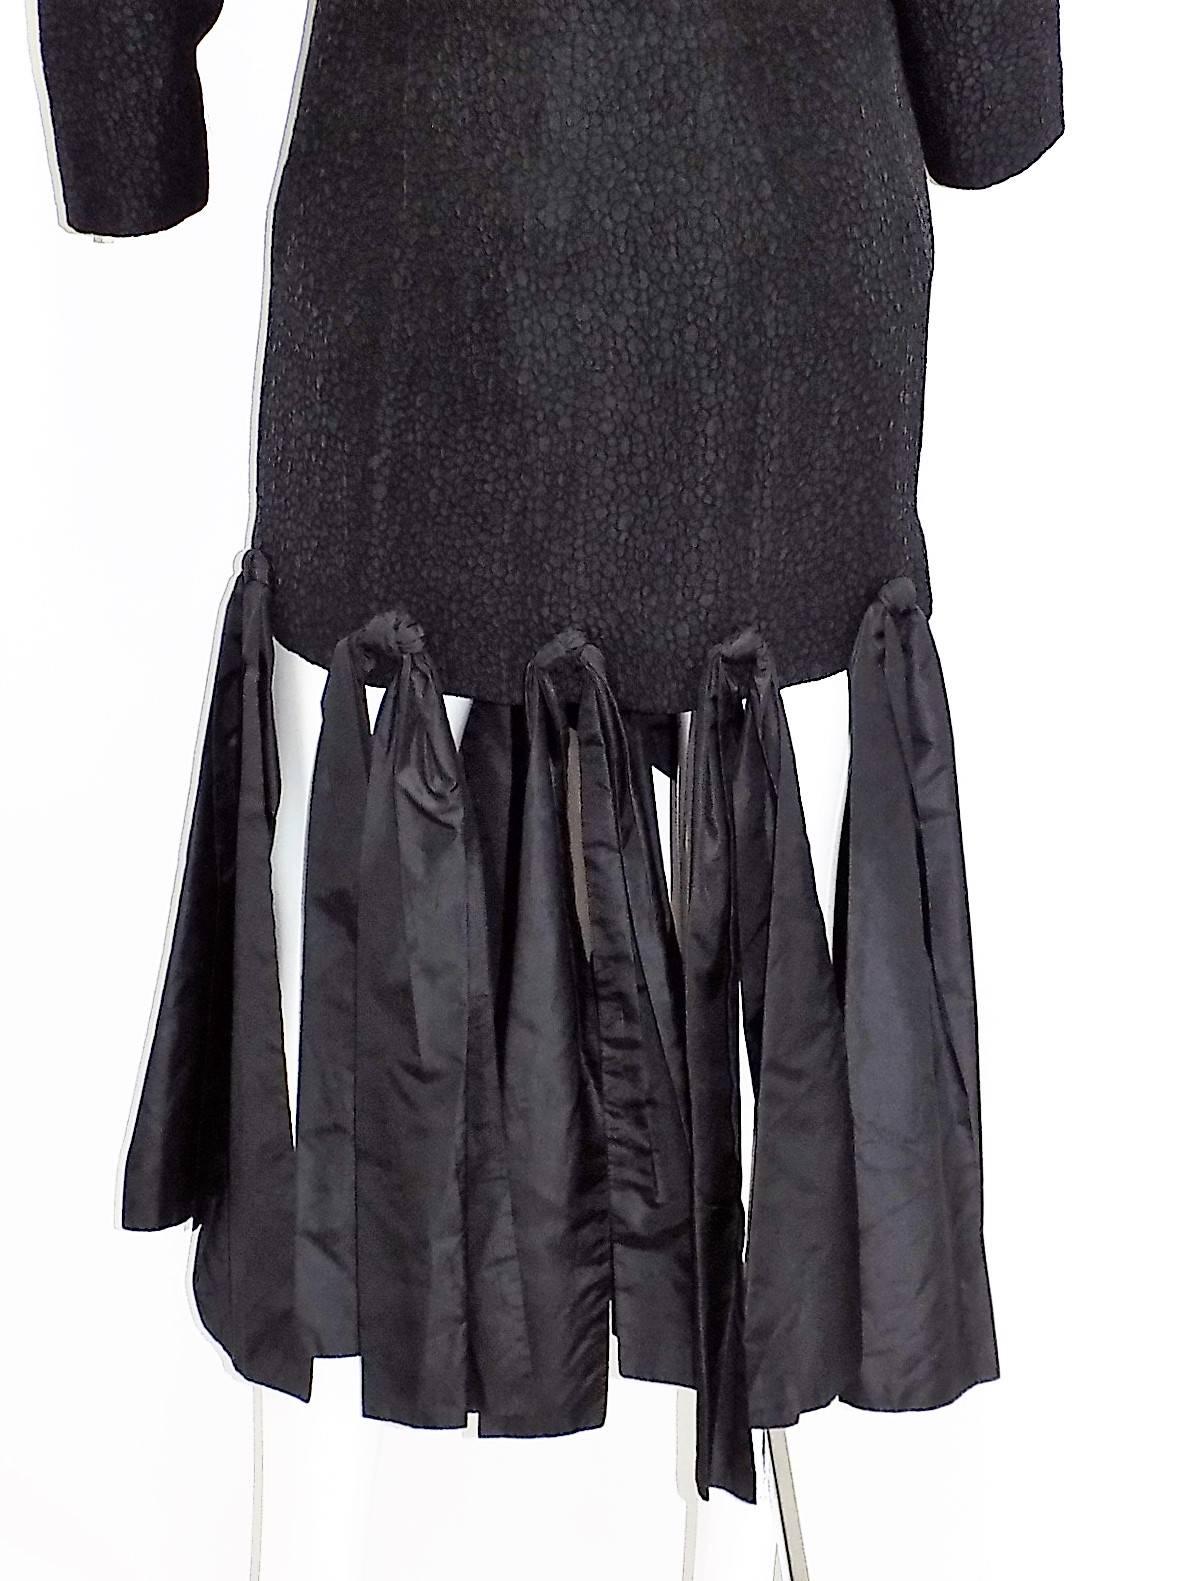 vintage Lanvin paris black cocktail dress with bows  In Excellent Condition For Sale In New York, NY